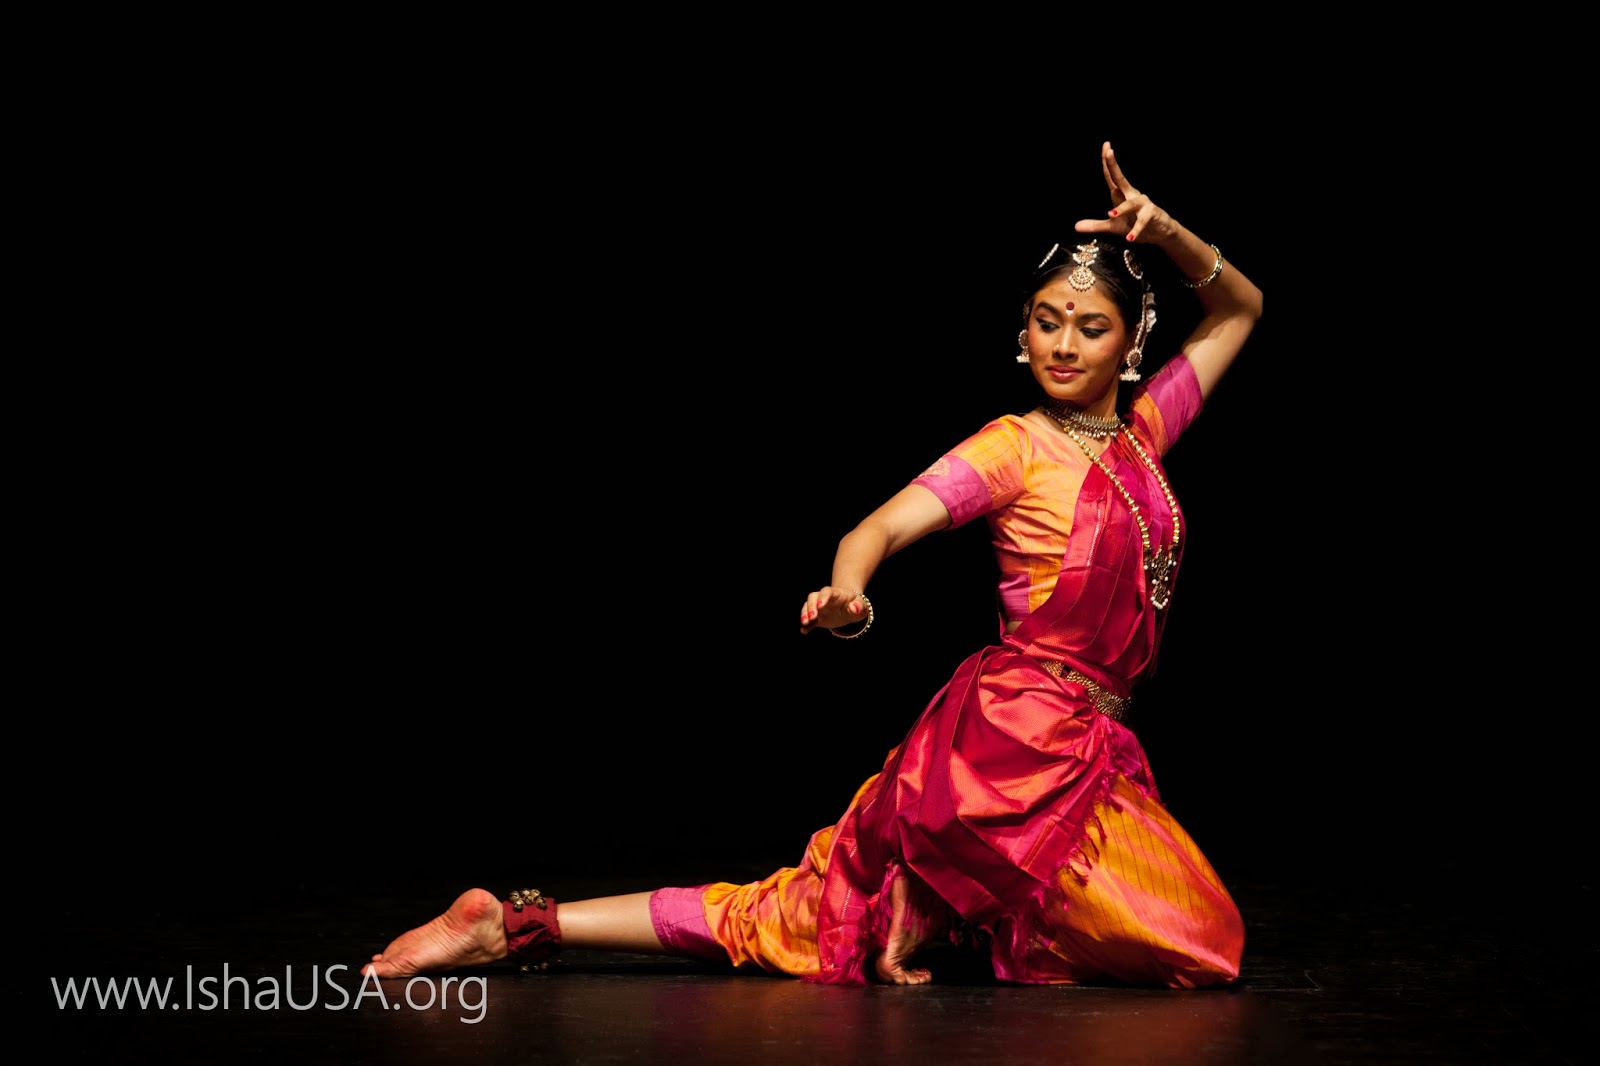 Radhe Jaggi, an emerging Bharatnatyam soloist from India. Radhe has been invited to perform at leading sabhas and events in India and abroad, including the Fitzwilliam College, Cambridge University, 